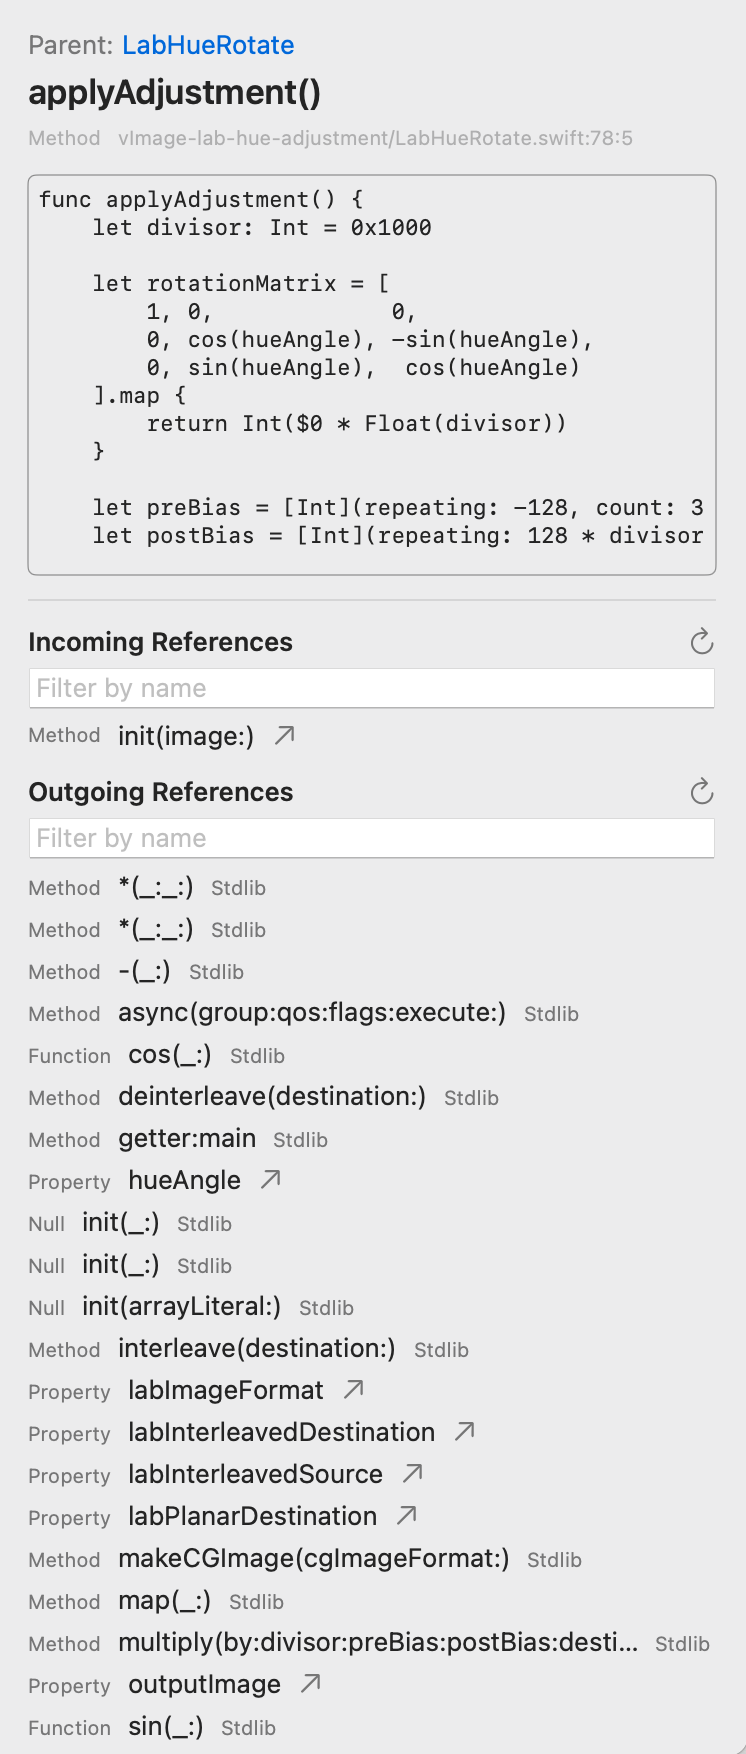 Tanagram's sidebar showing incoming and outgoing references for a selected item